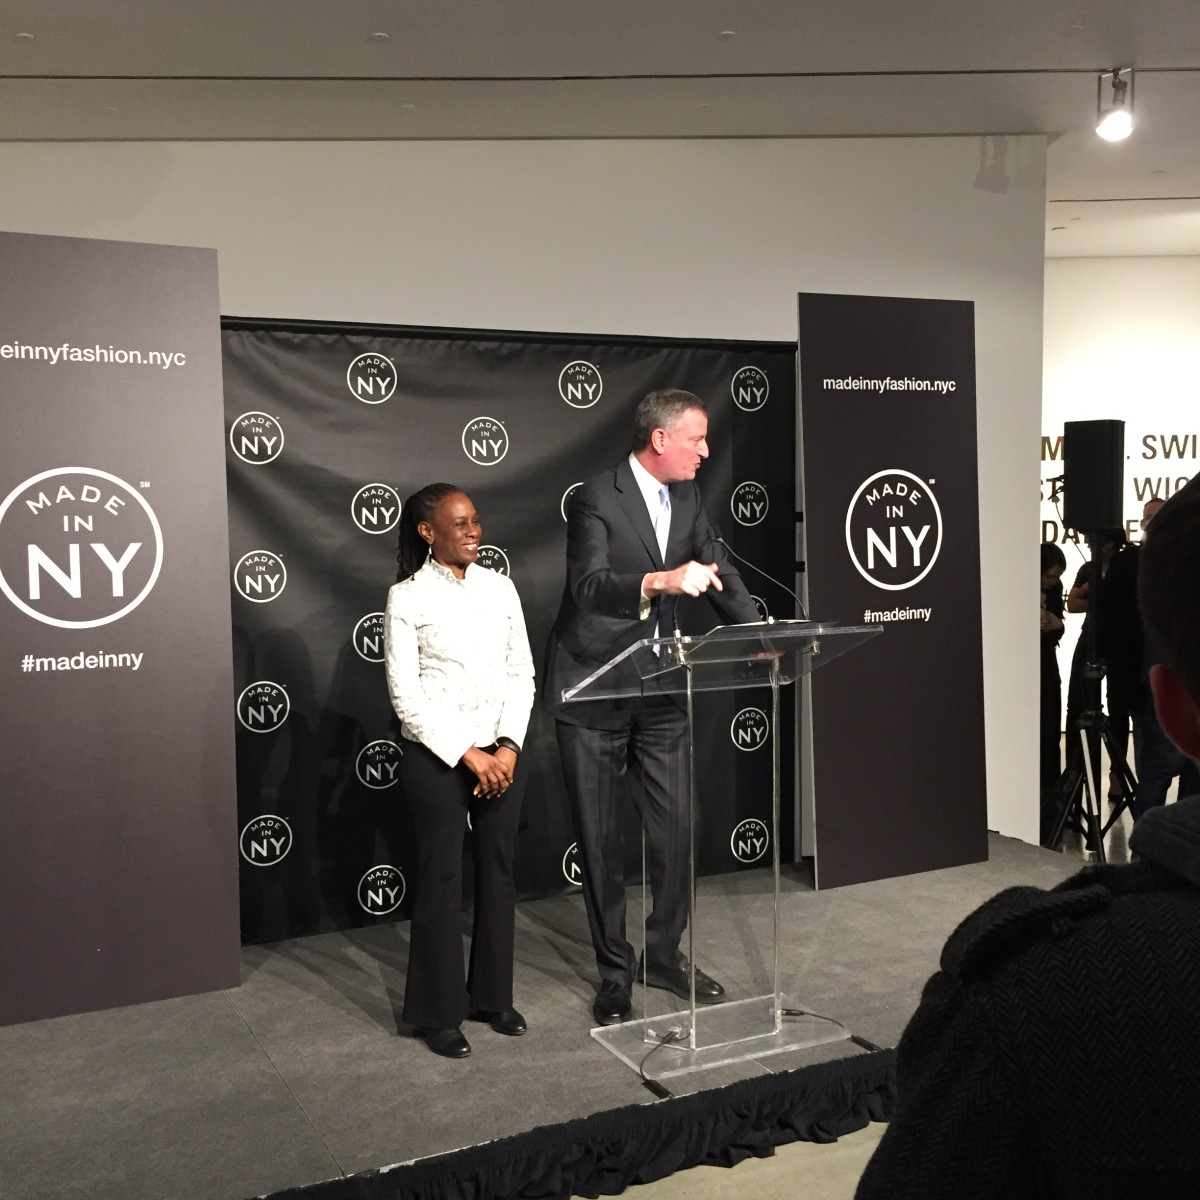 Chirlane McCray and Mayor Bill de Blasio at the Made in NY event on Tuesday night at Milk Studios. Photo: Chantal Fernandez/Fashionista